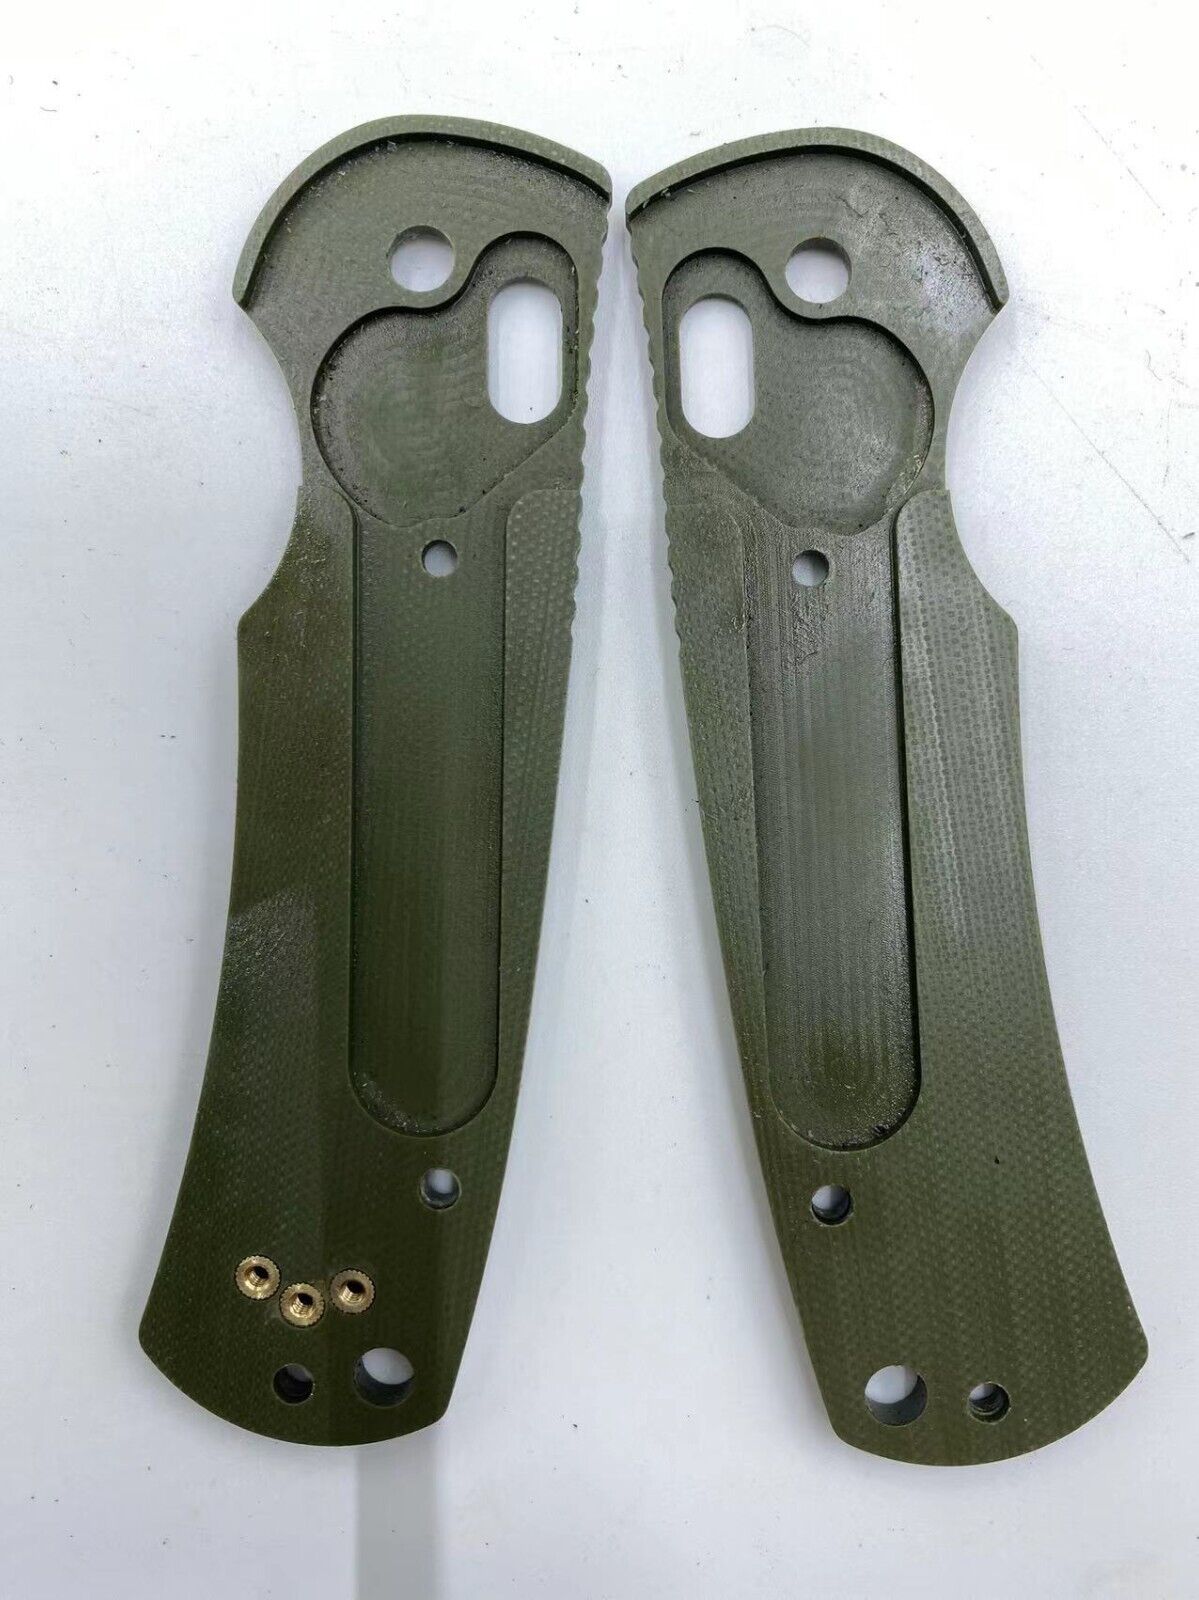 1 Pair G10 Knife Handle Scales for Benchmade Griptilian 550/551 Folding Knives